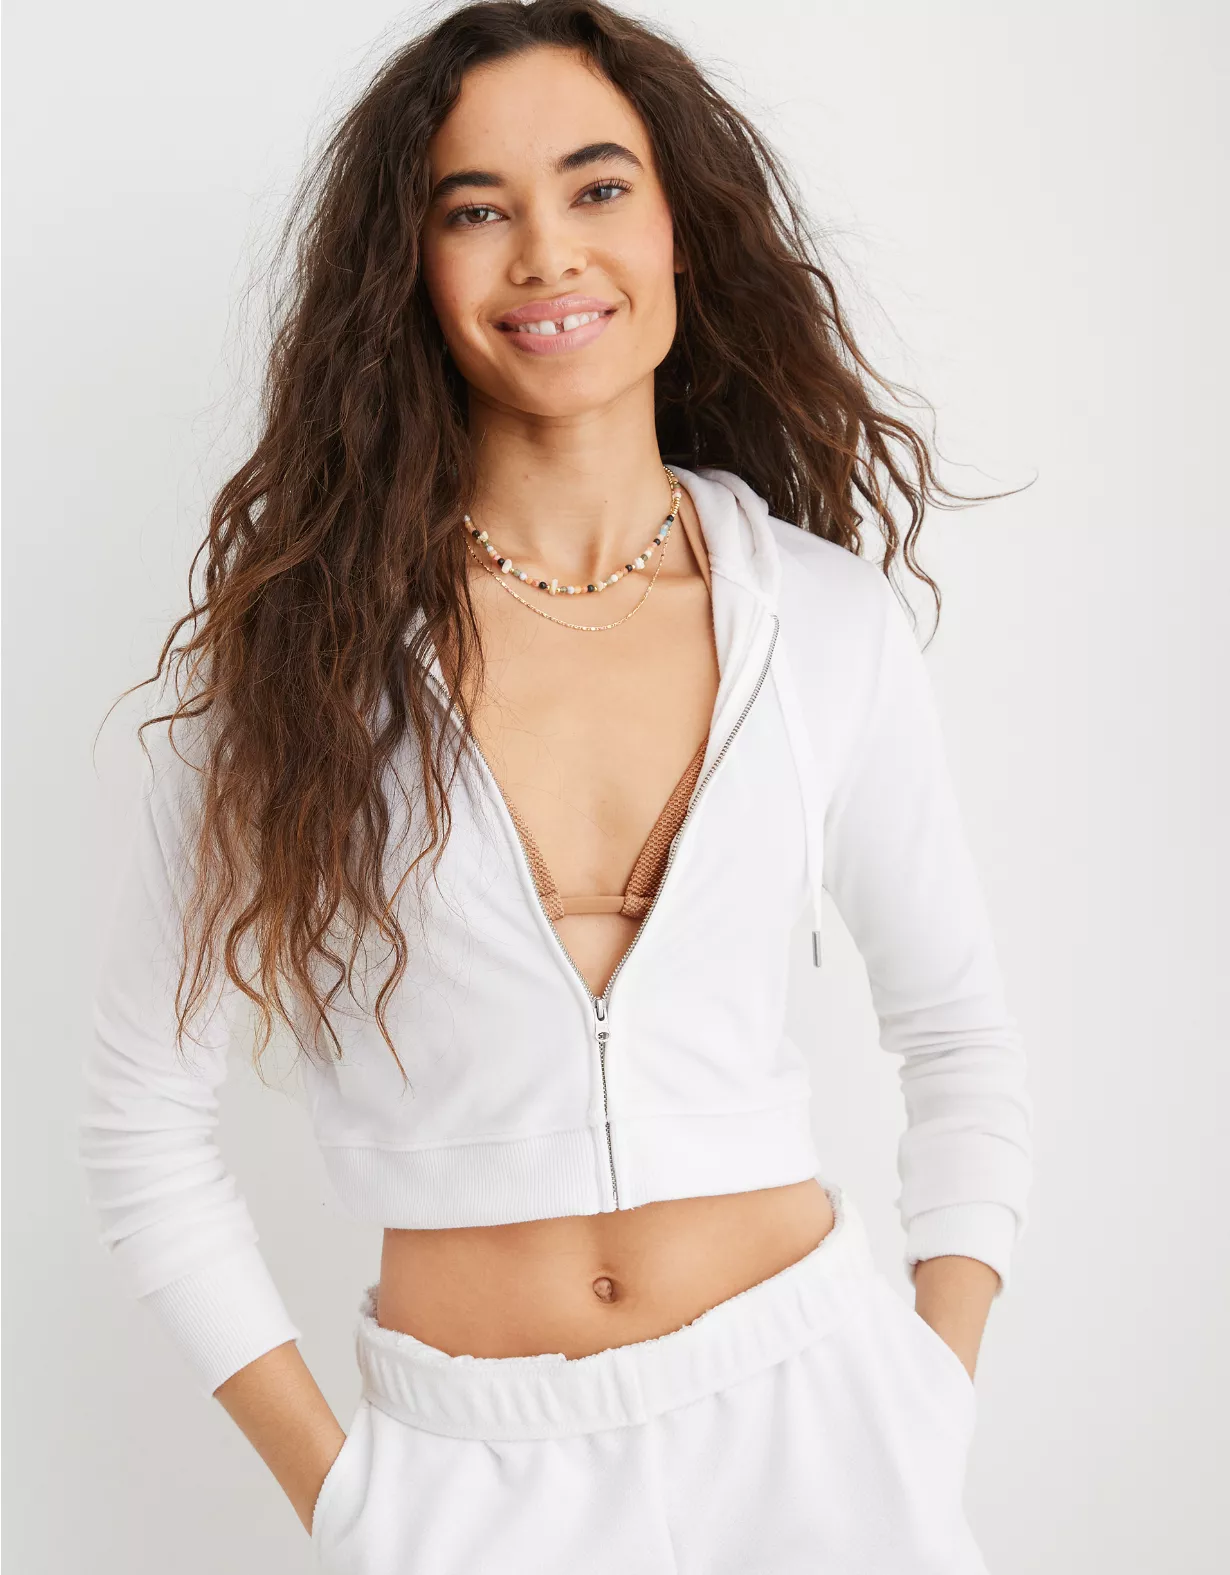 Aerie Dreamy Velour Cropped Hoodie